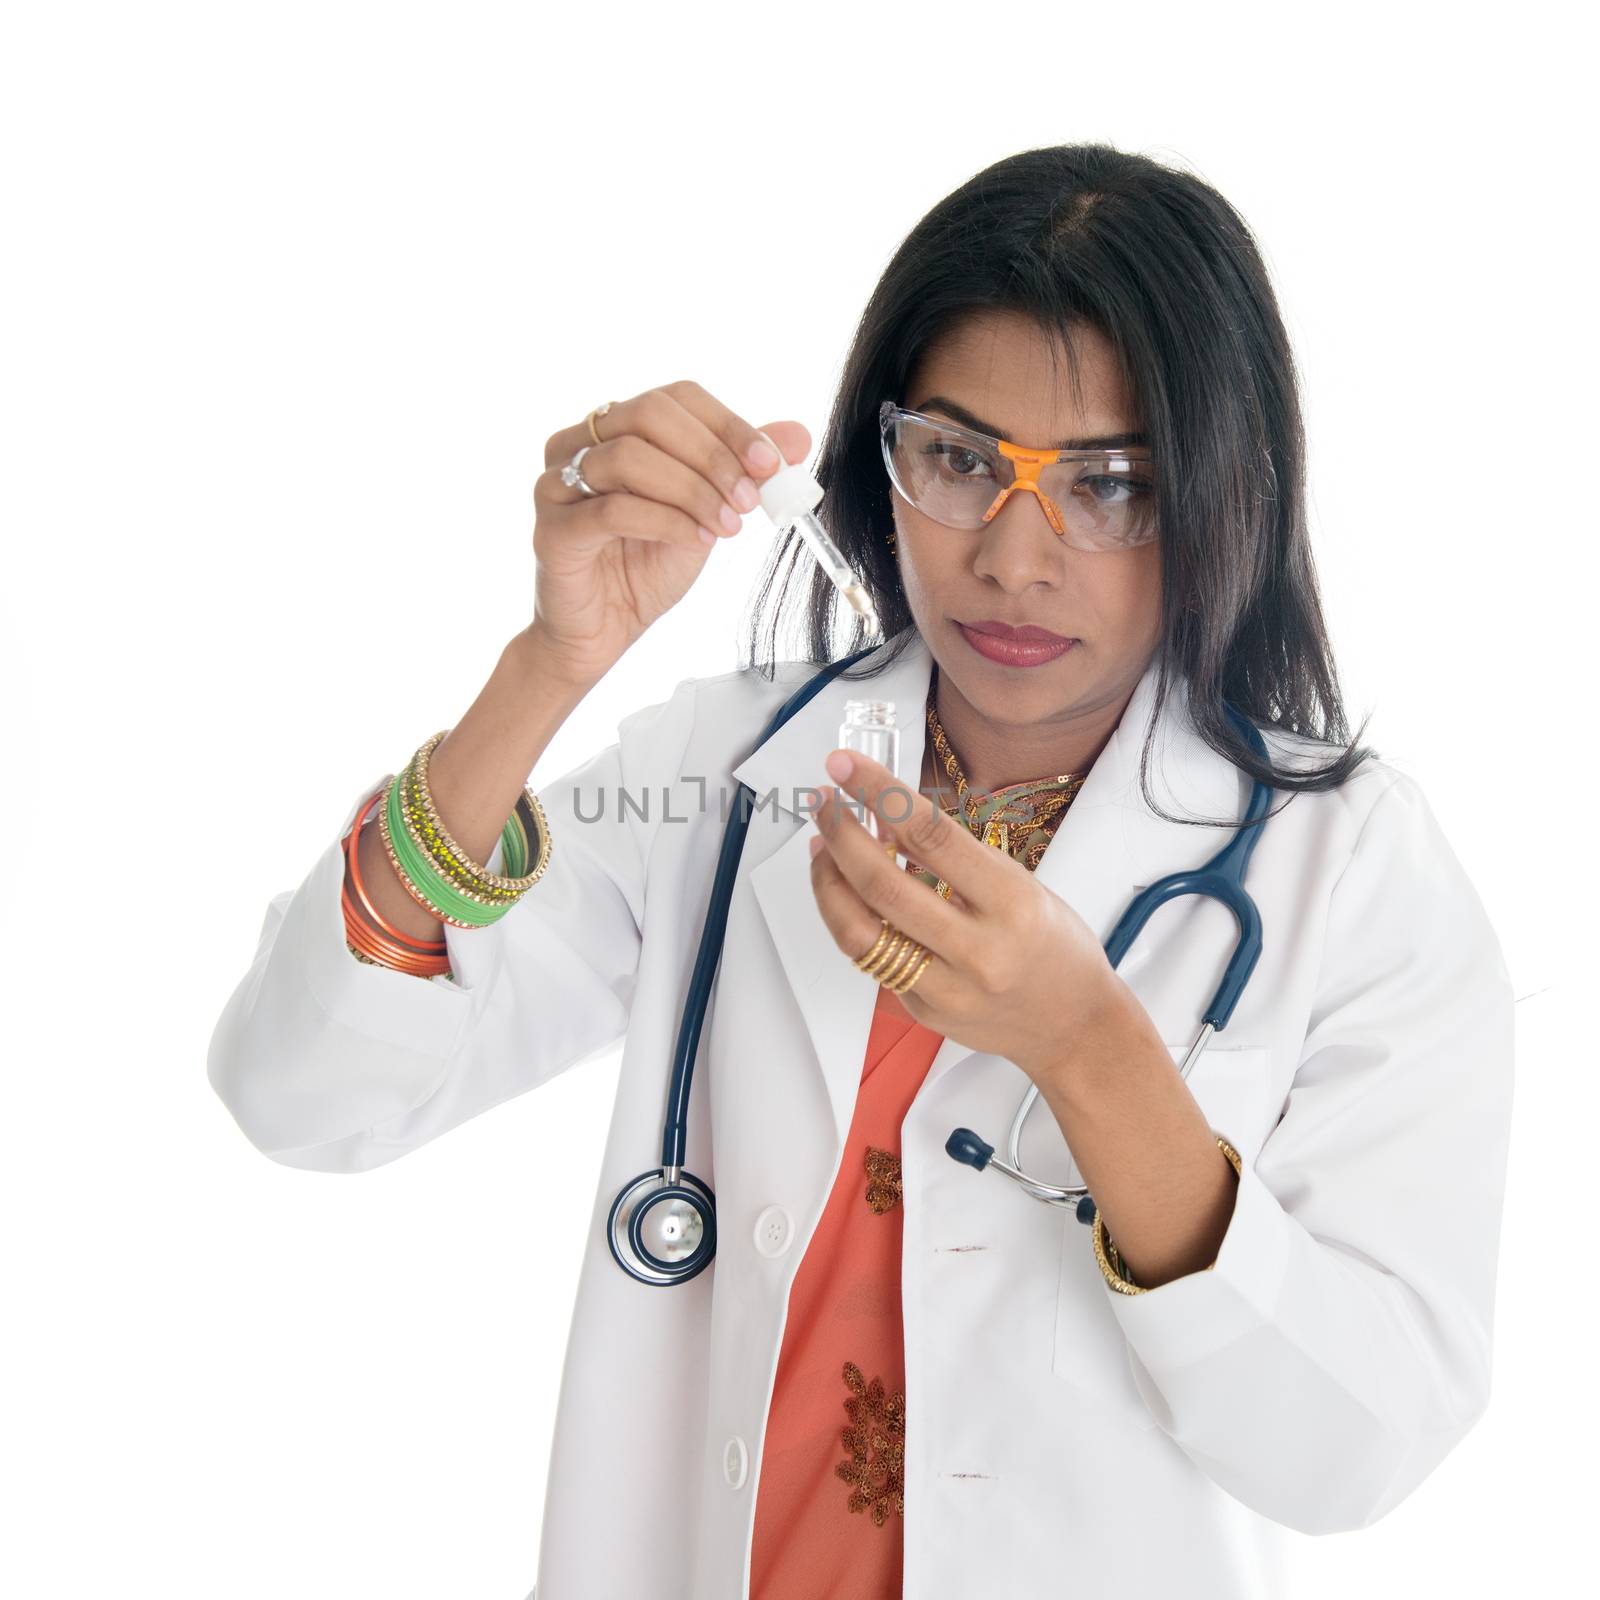 An Indian female medical or scientific researcher or woman doctor looking at a test tube of clear solution in a laboratory.